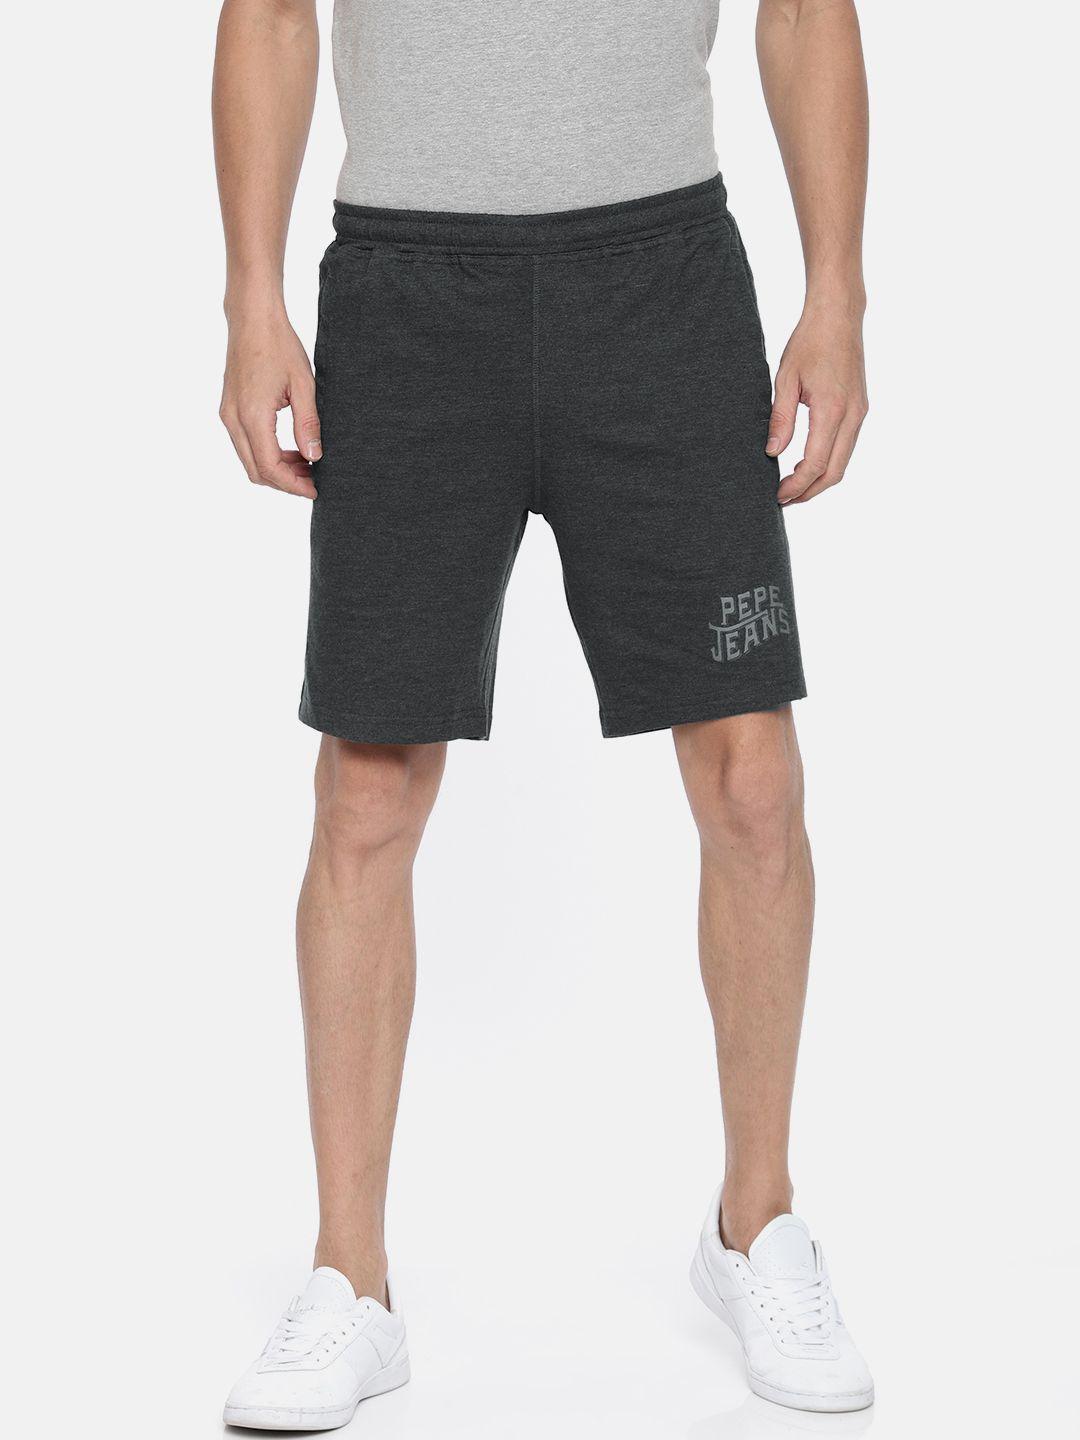 pepe-jeans-men-charcoal-grey-solid-regular-fit-sports-shorts